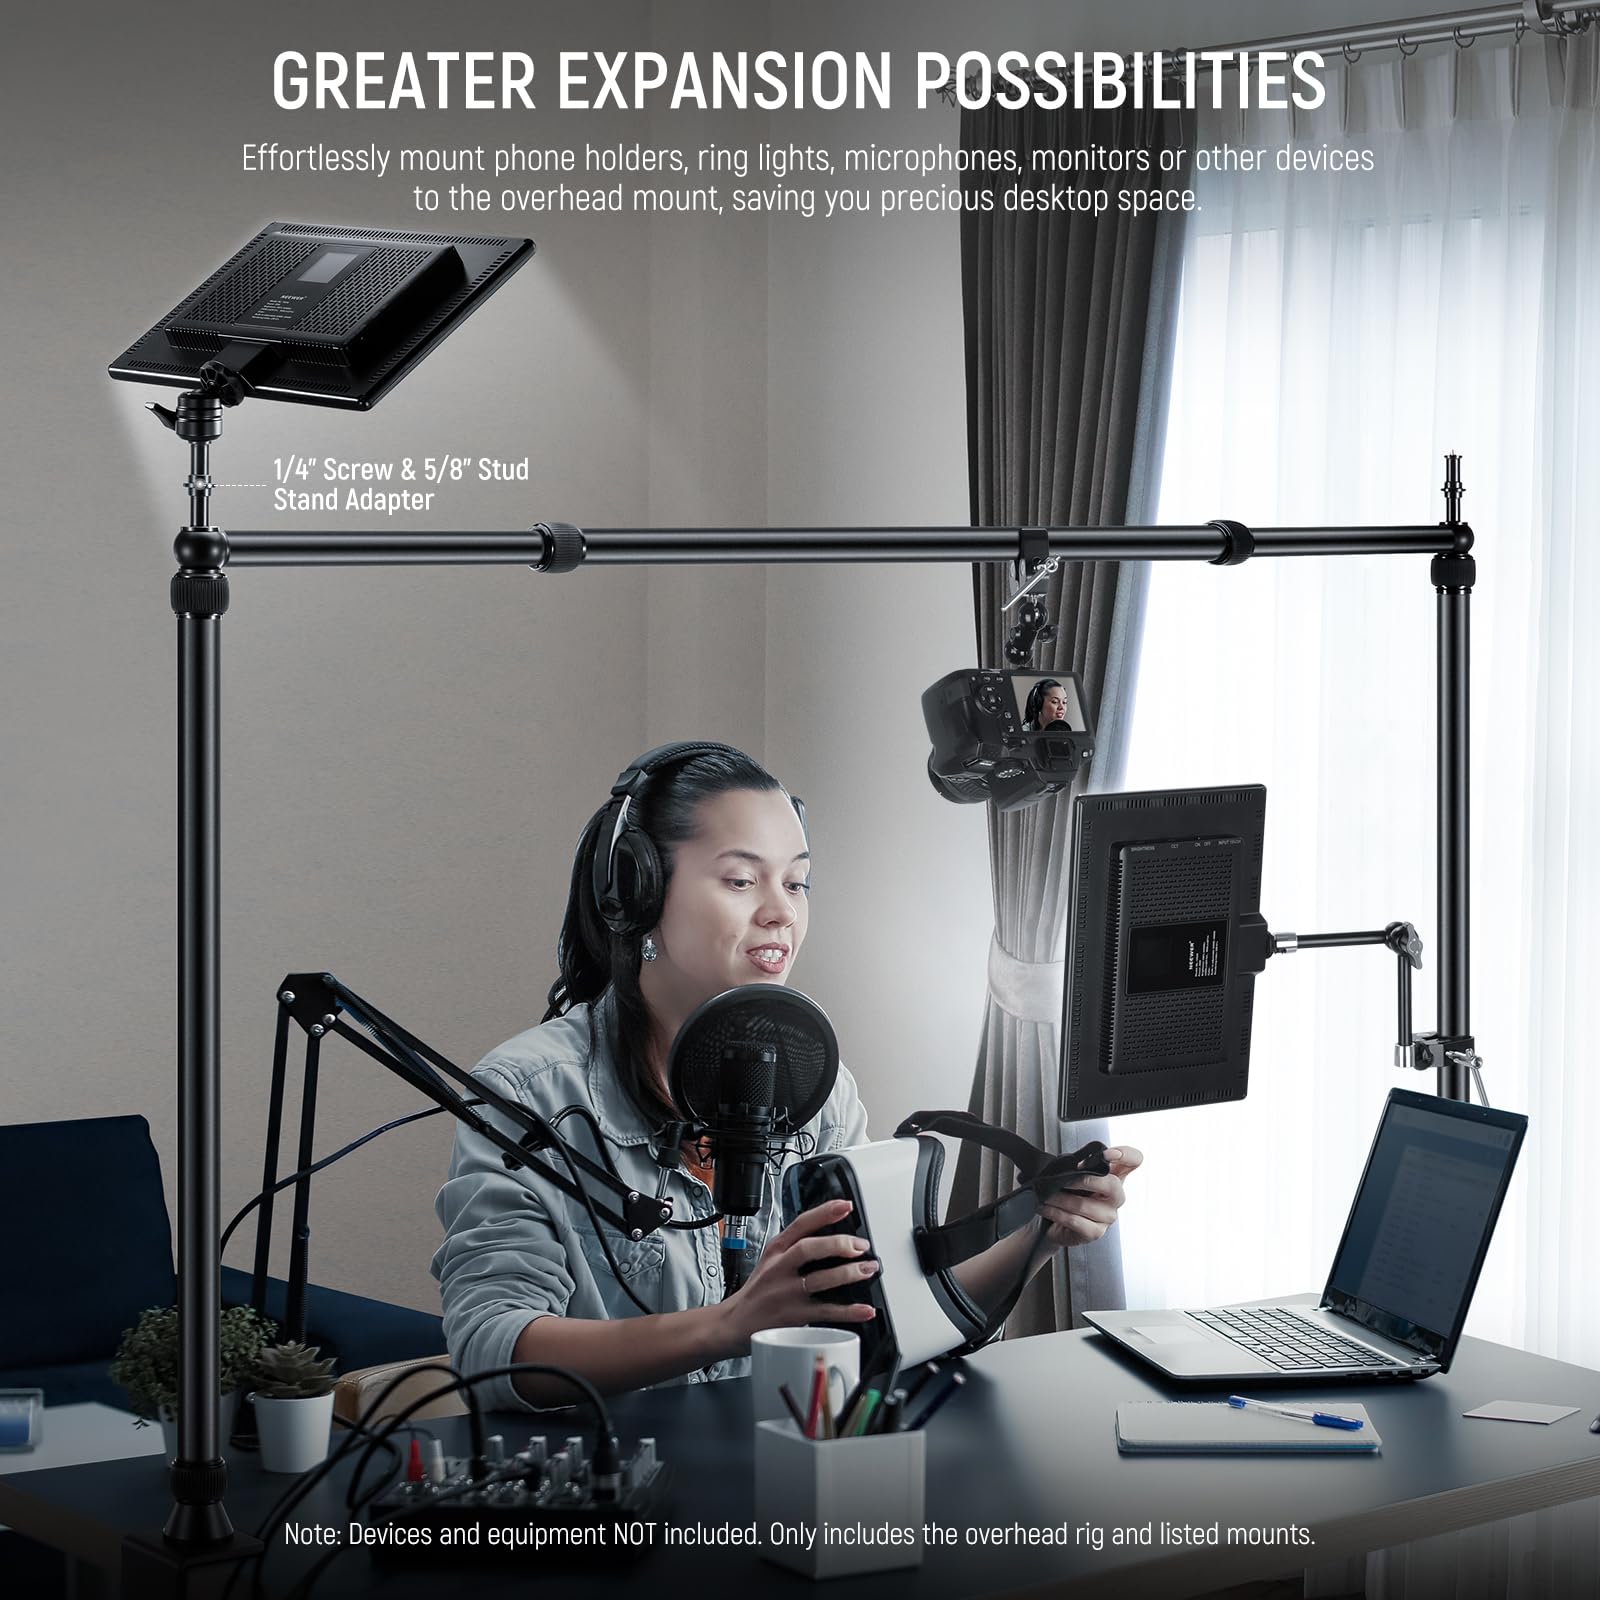 NEEWER Overhead Camera Mount Rig with Dual Ballhead Super Clamp/Phone Holder for Desktop Top Down Shots, Metal Multi Device Mount Platform for Photography Lighting, Max Load 26.5lb/12kg, NK002